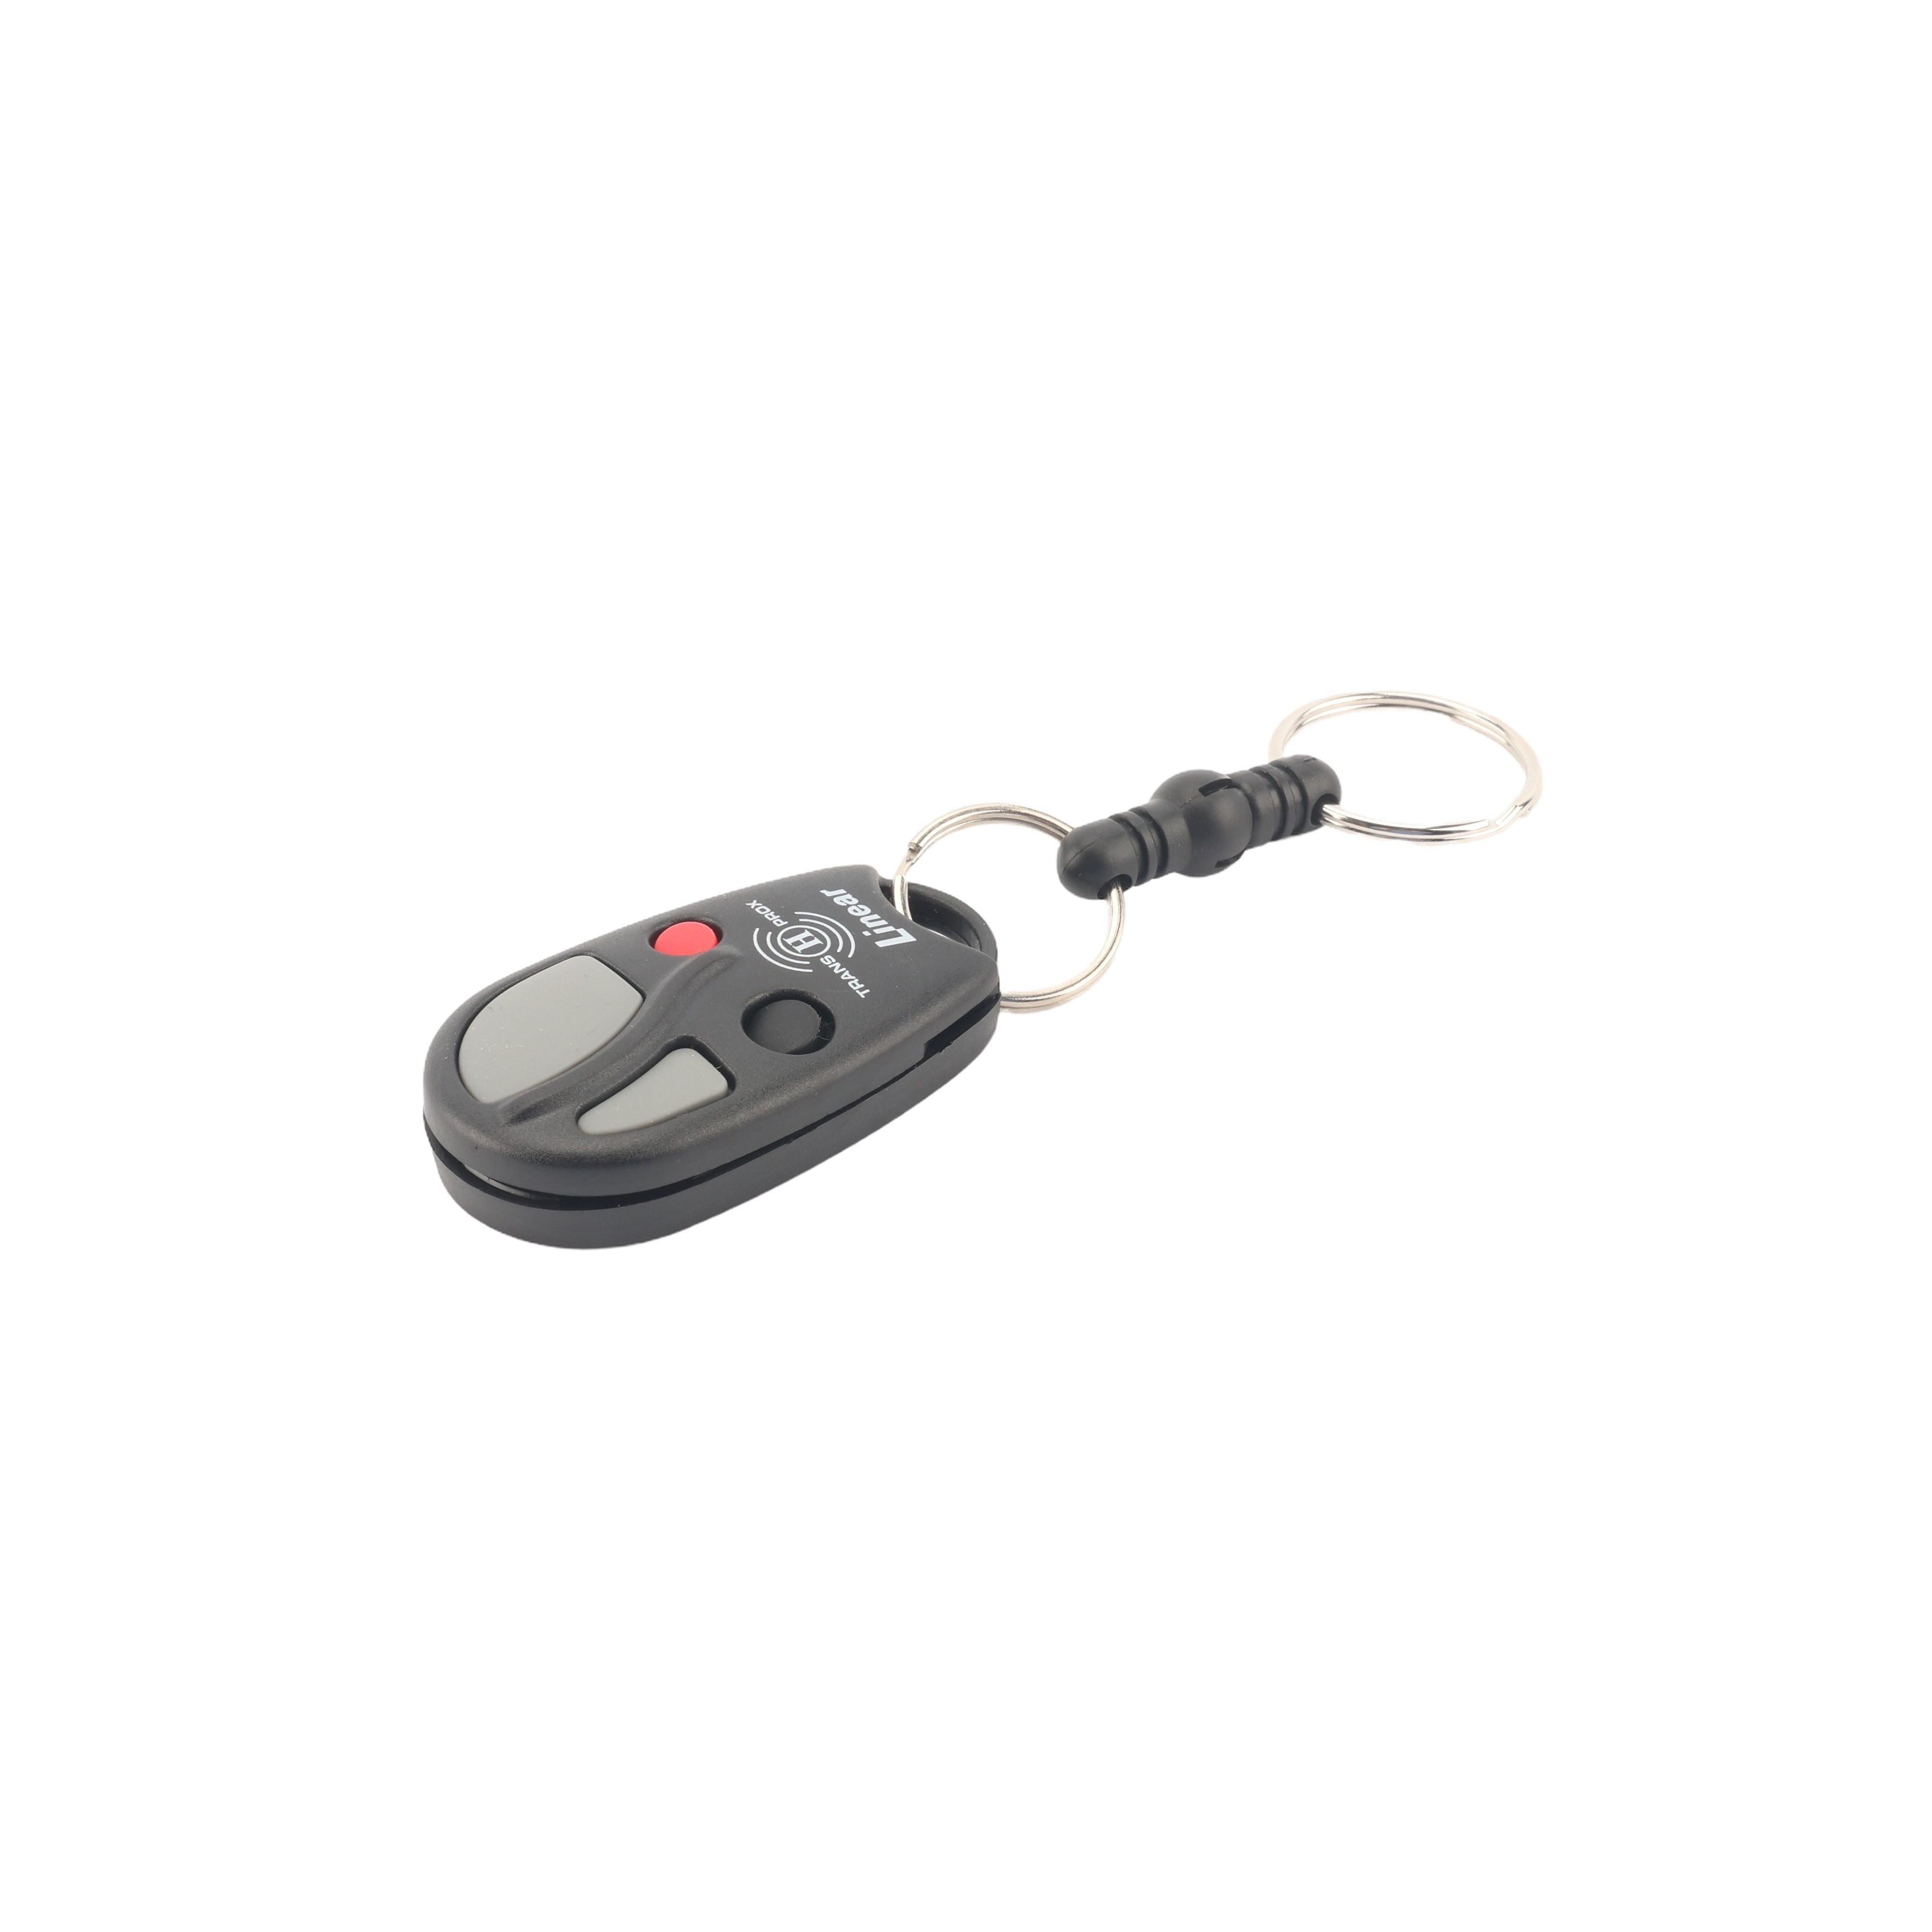 Linear ACT-34DHC 4-Channel Key Chain, TRANSMITTER PROX - HID 